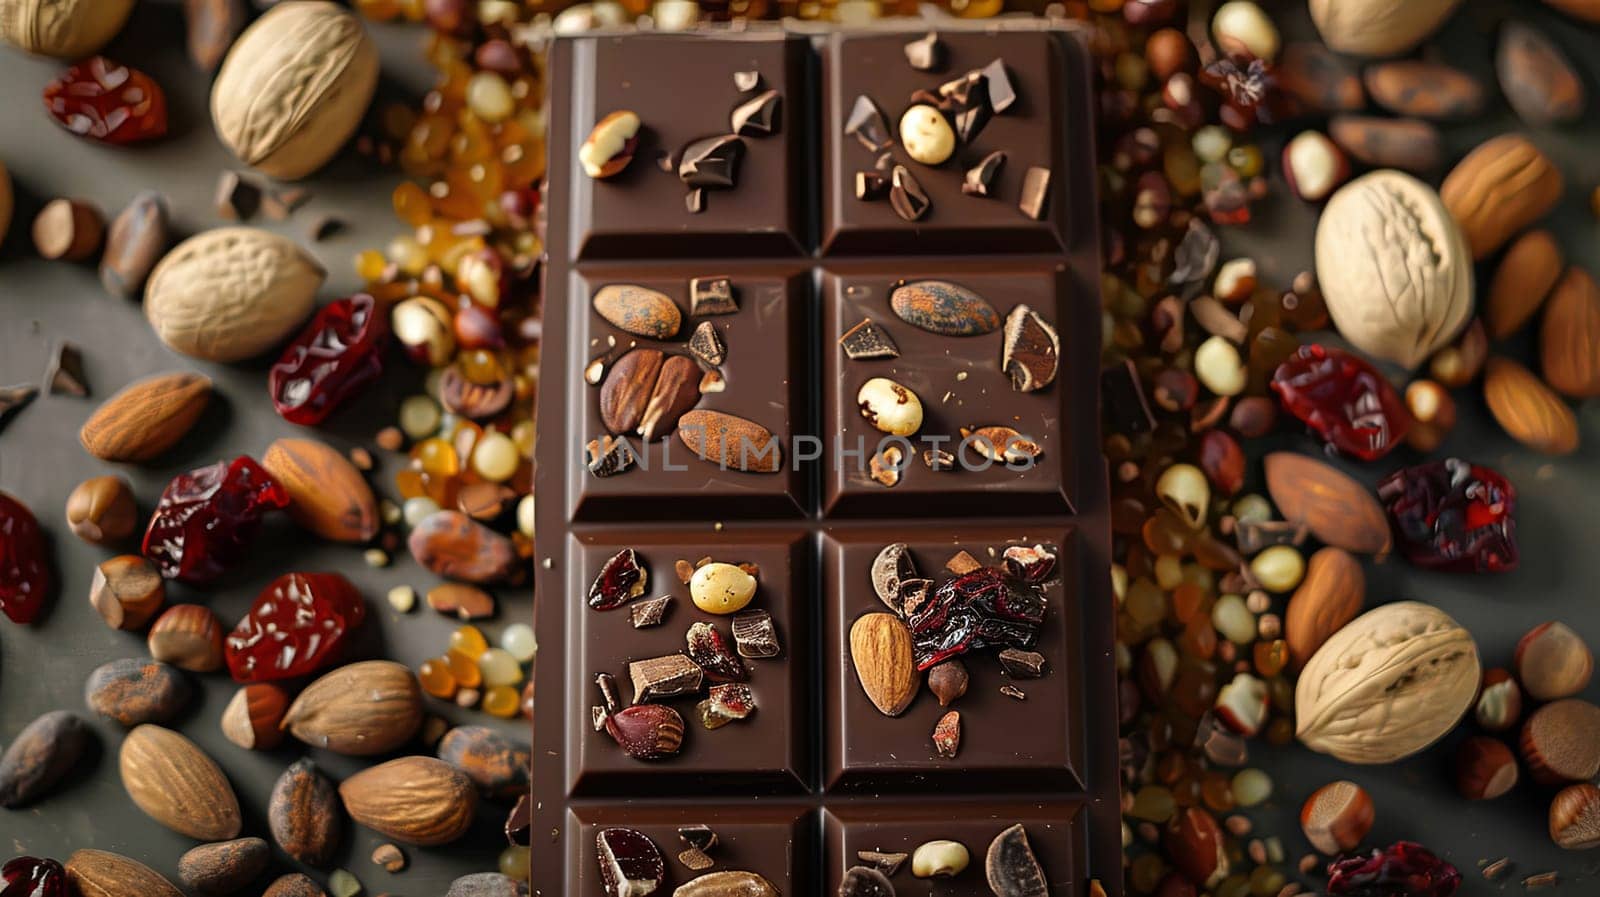 Rich chocolate bar surrounded by an assortment of nuts and dried cranberries, creating a natural and appetizing display.